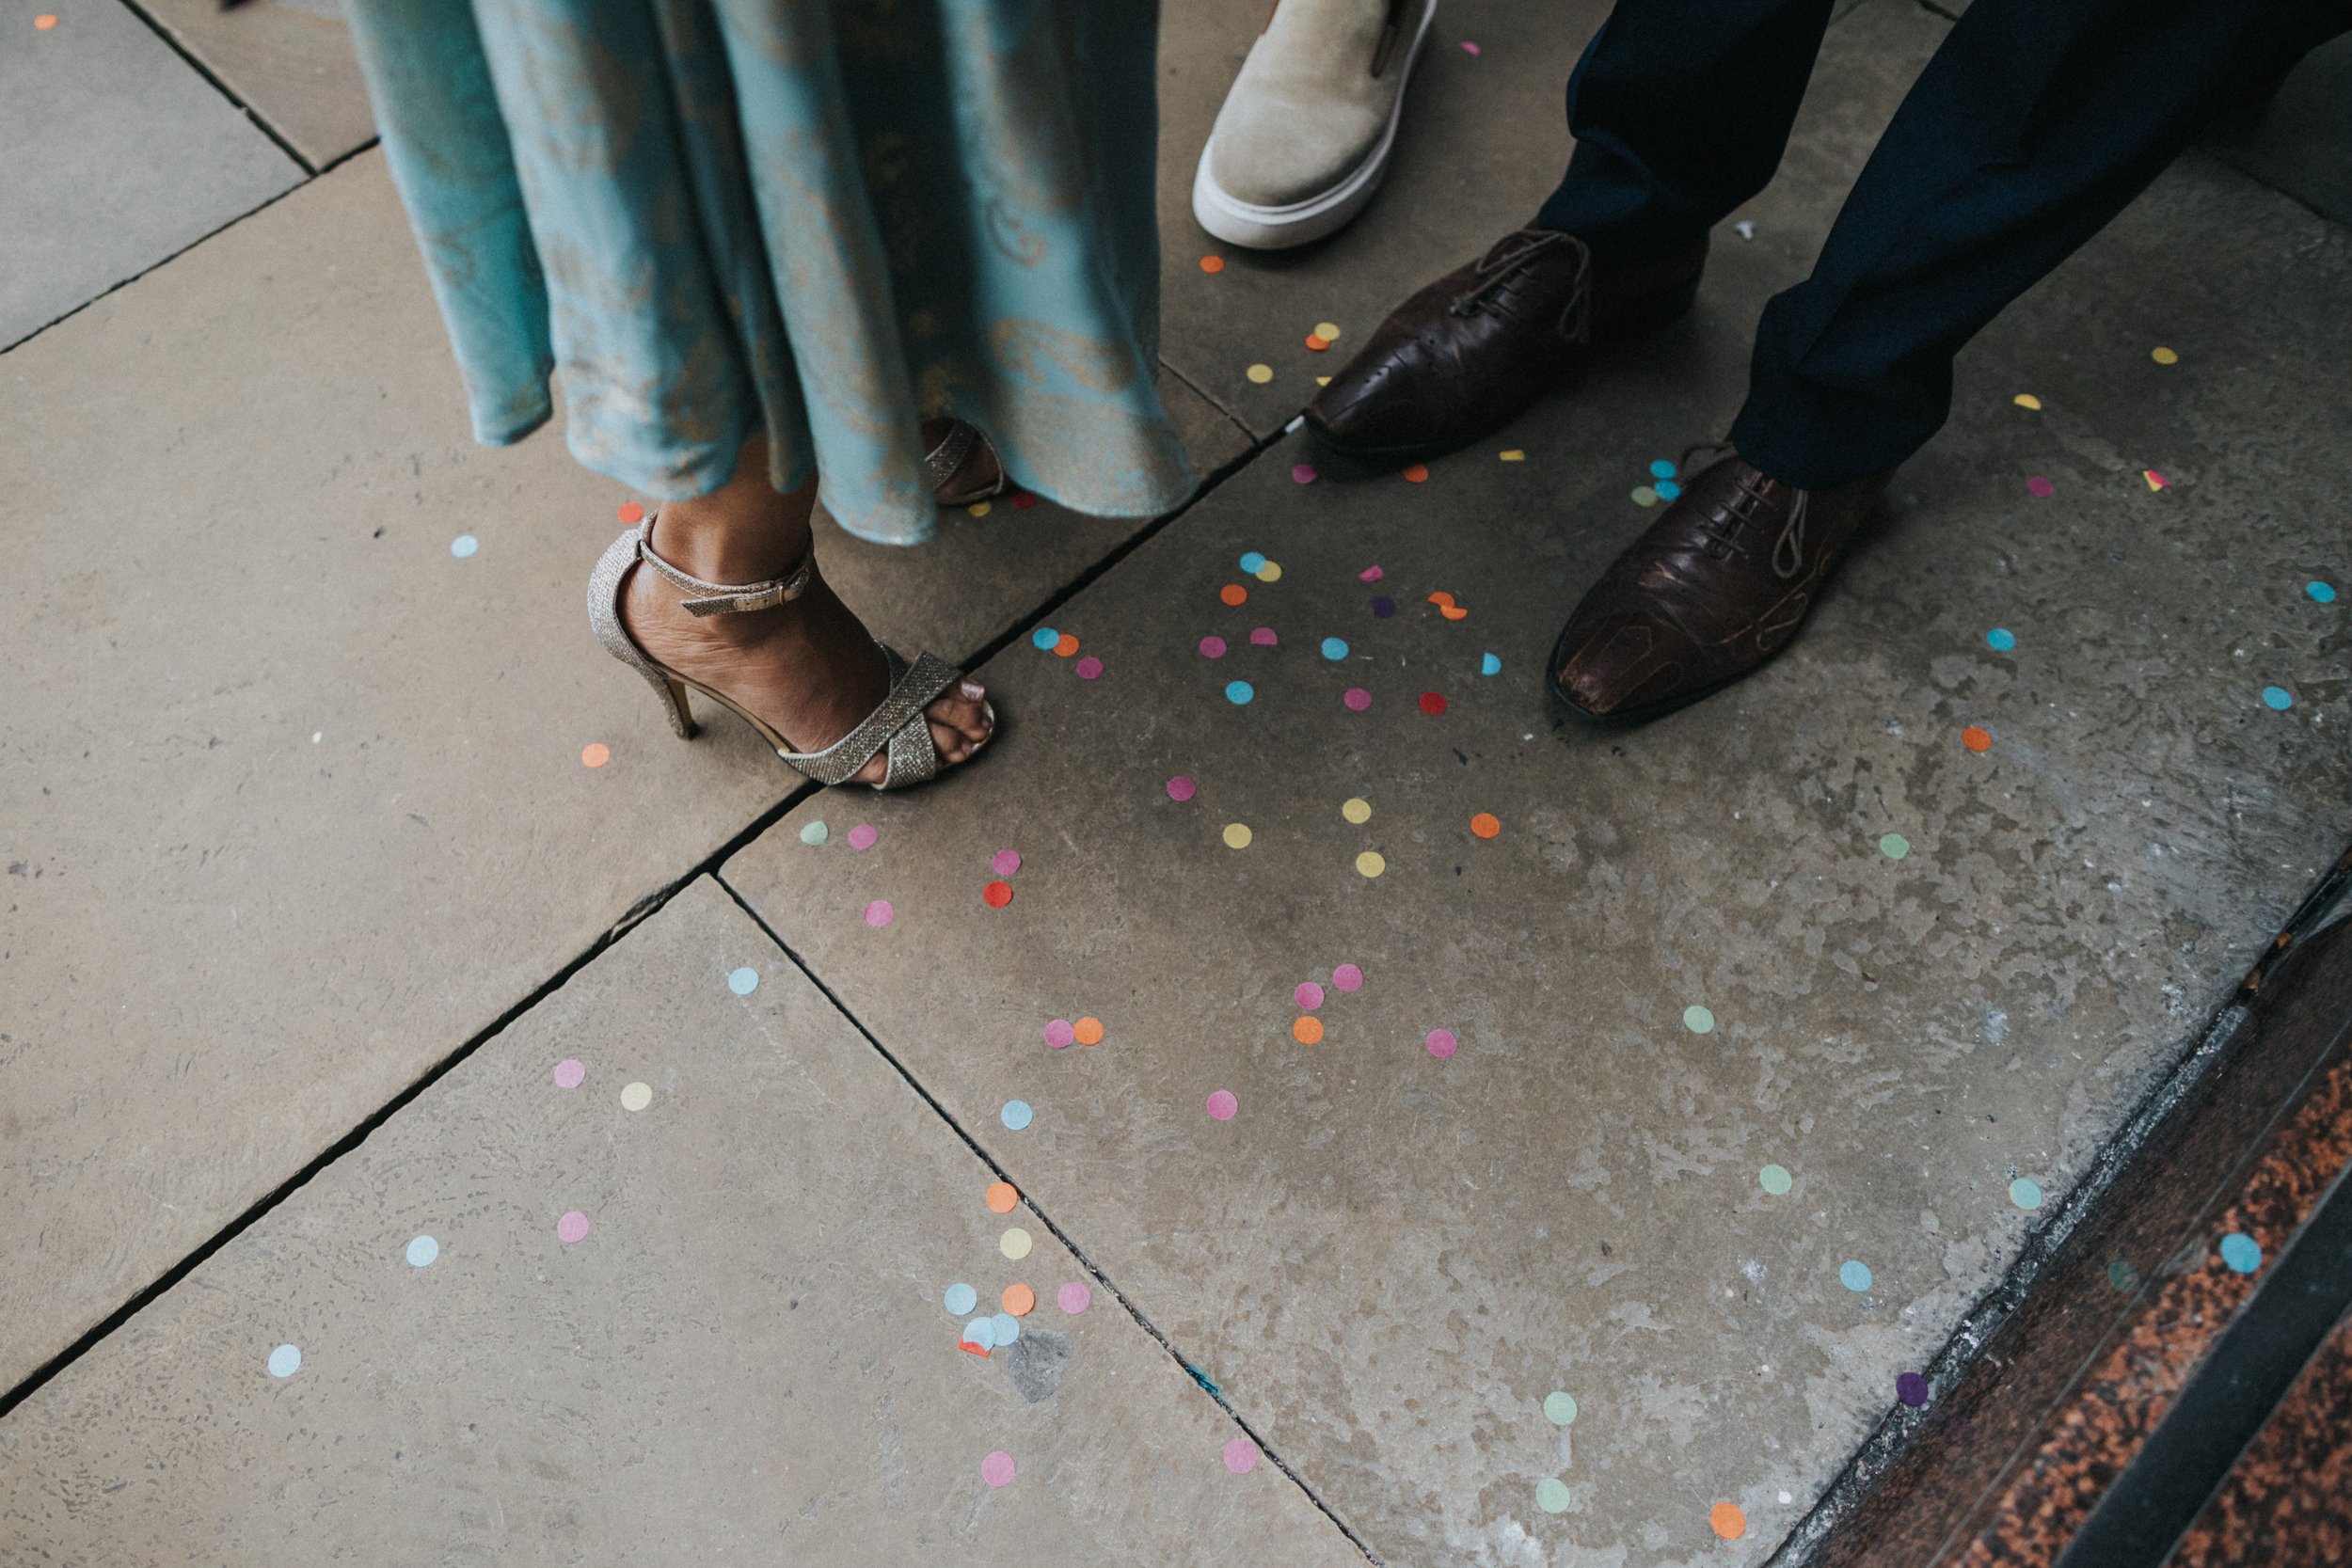 Lady with blue dress and silvers shoes has spilt colourful confetti on the floor.  